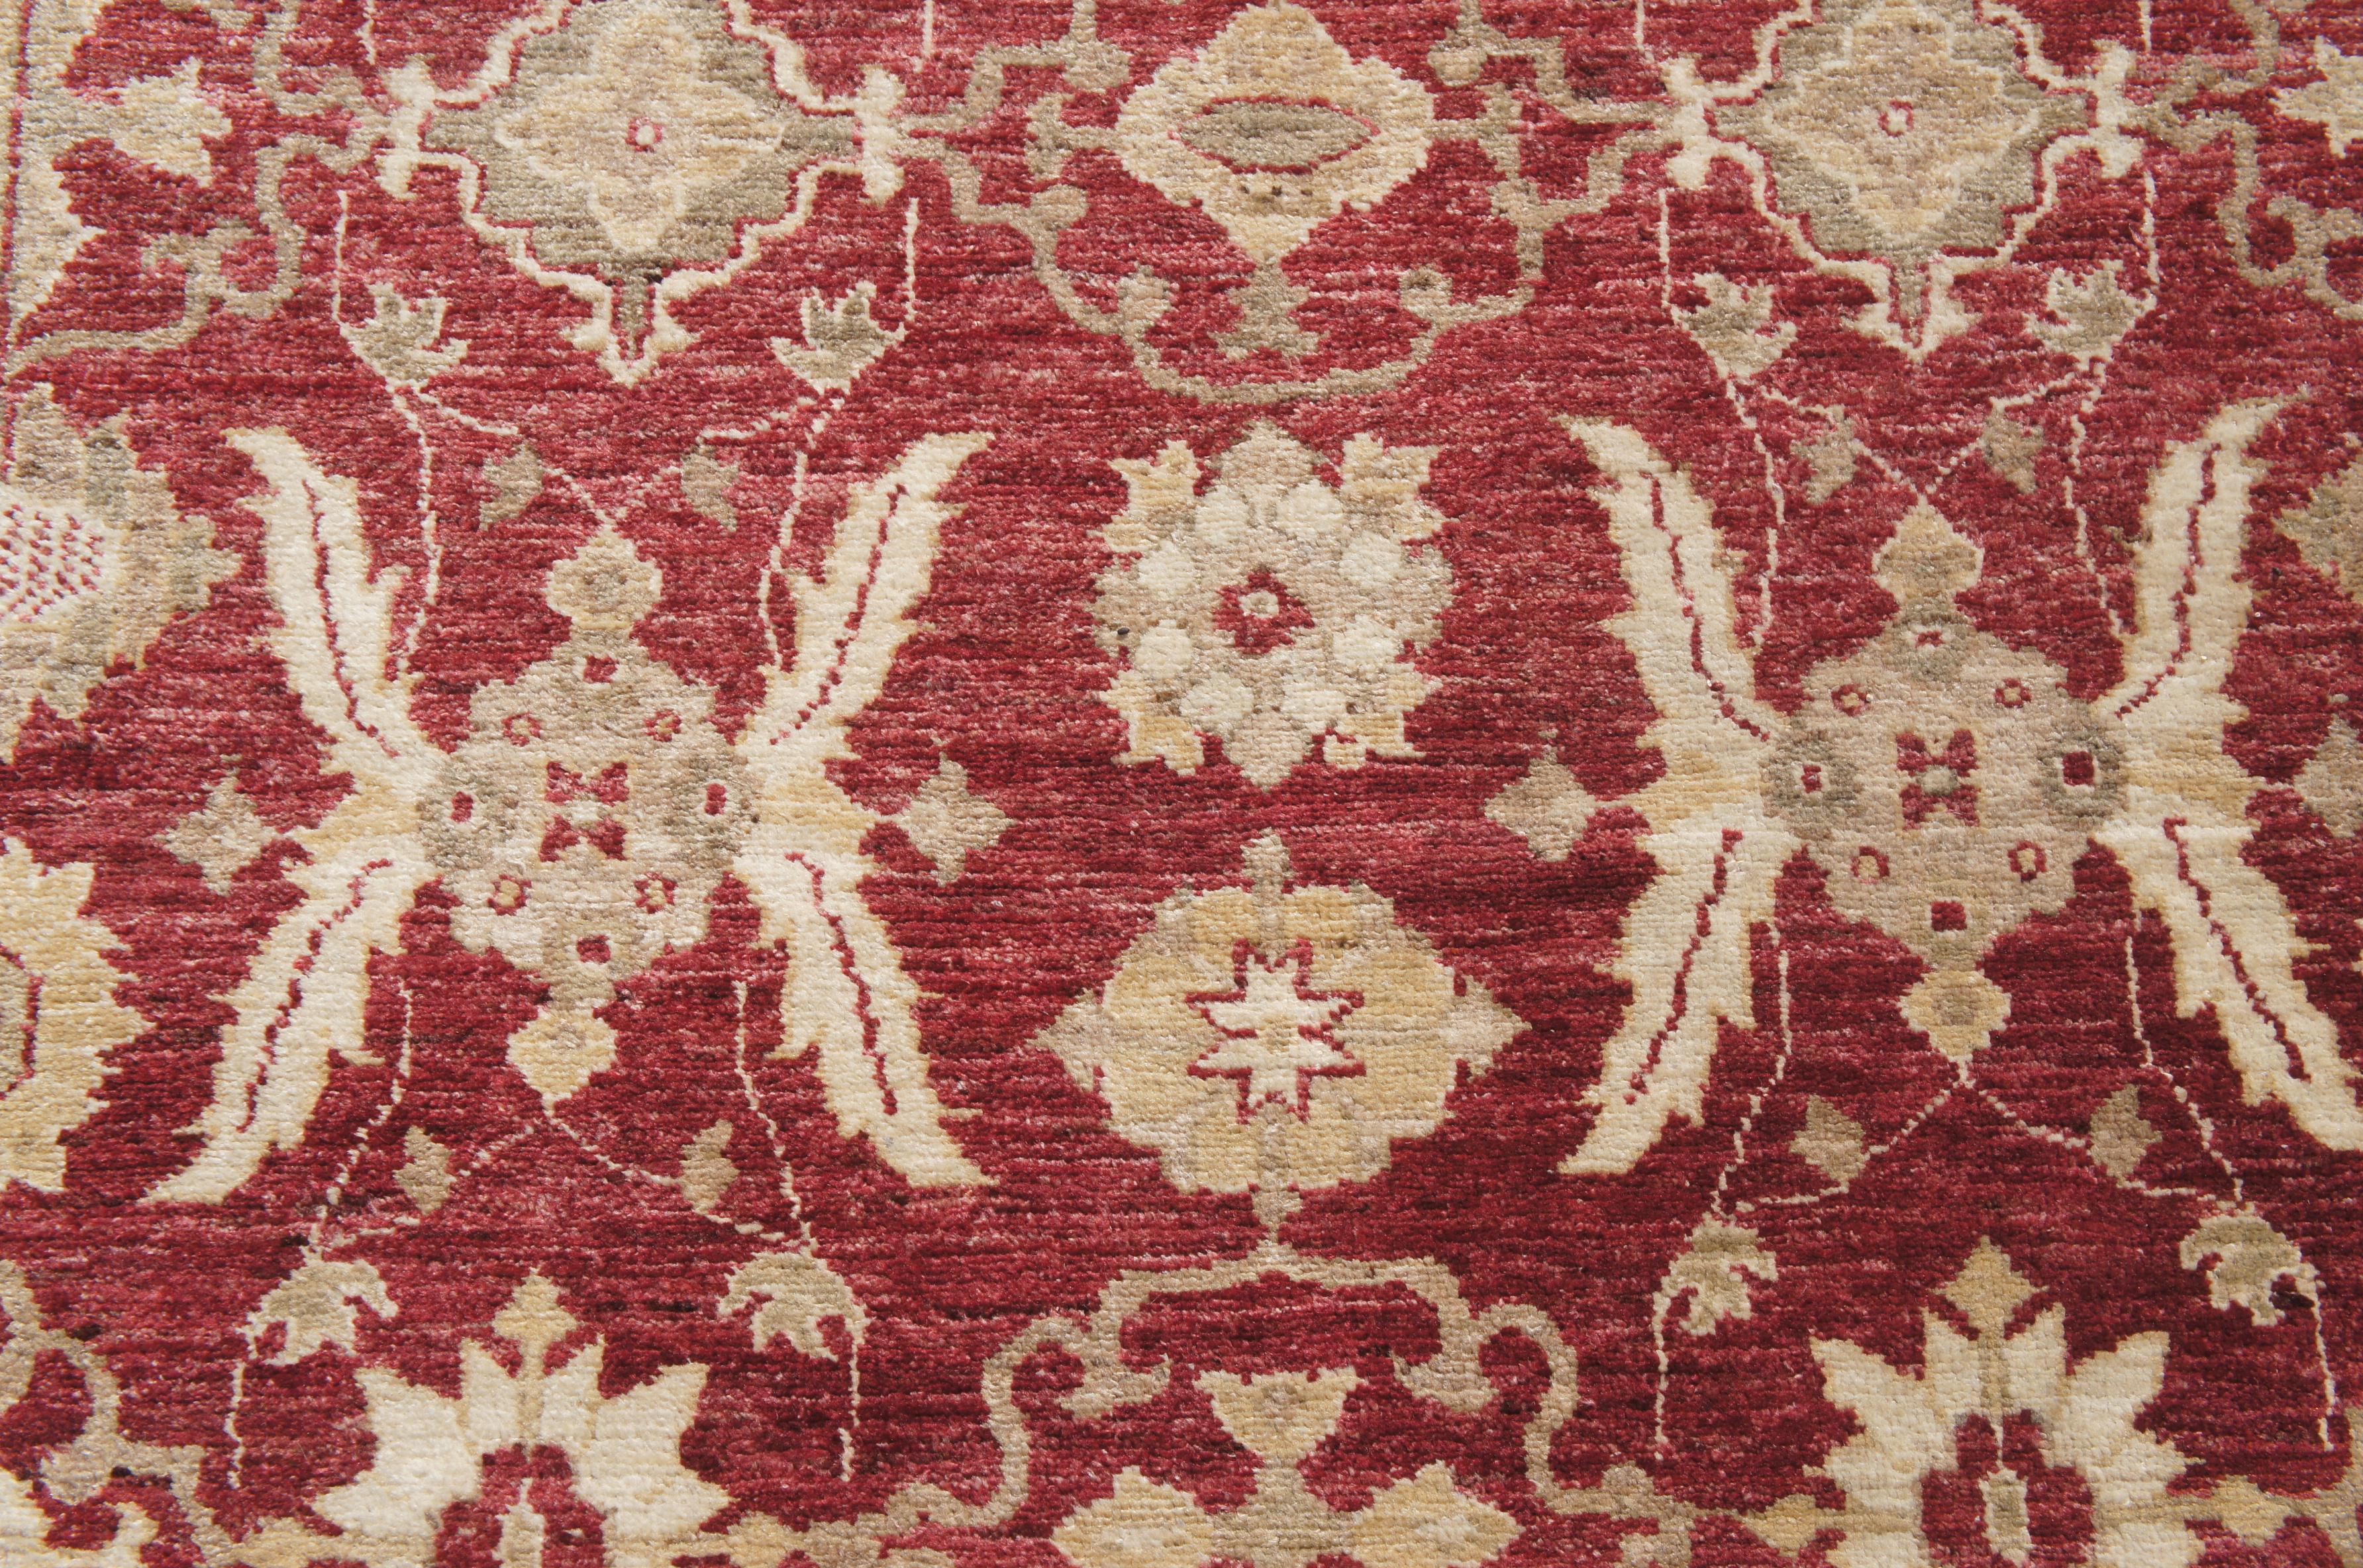 Hand Woven Turkish Red & Beige Geometric Floral Wool Carpet Area Rug 5' x 7' For Sale 3